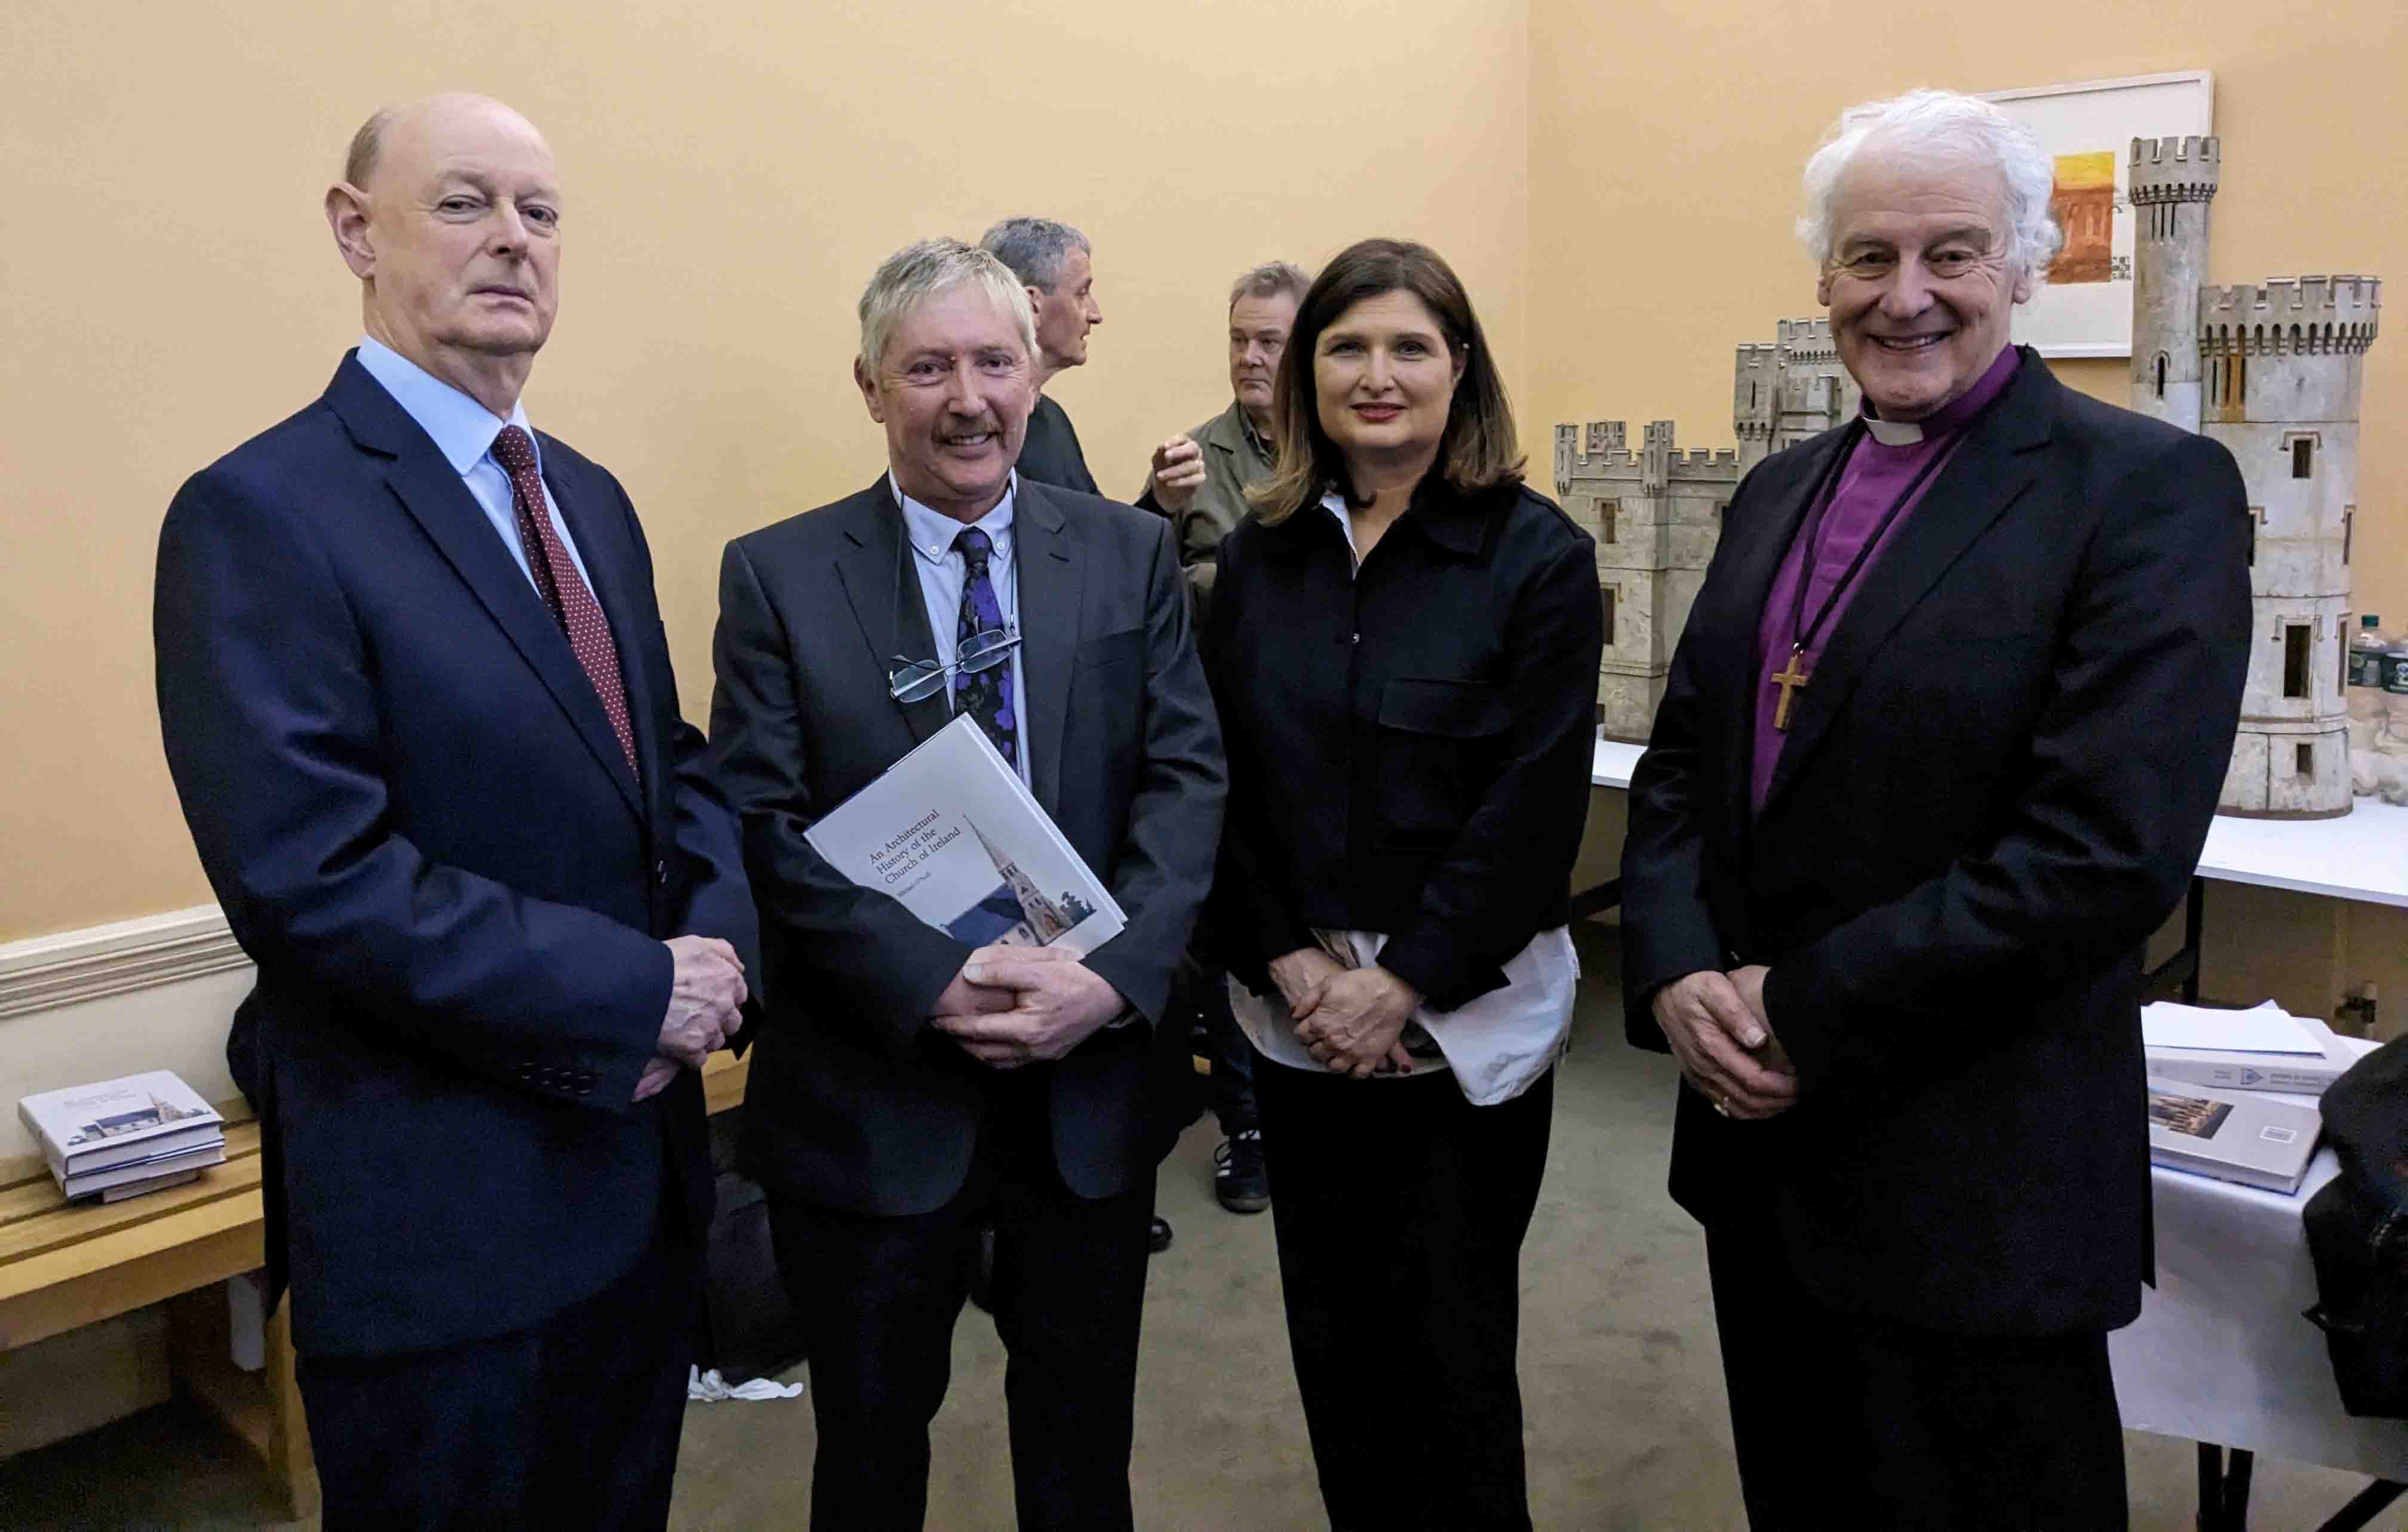 From left: Dr Ray Refaussé (Church of Ireland Publishing), author Dr Michael O'Neill, and guest speakers Dr Sandra O'Connell and Archbishop Michael Jackson.